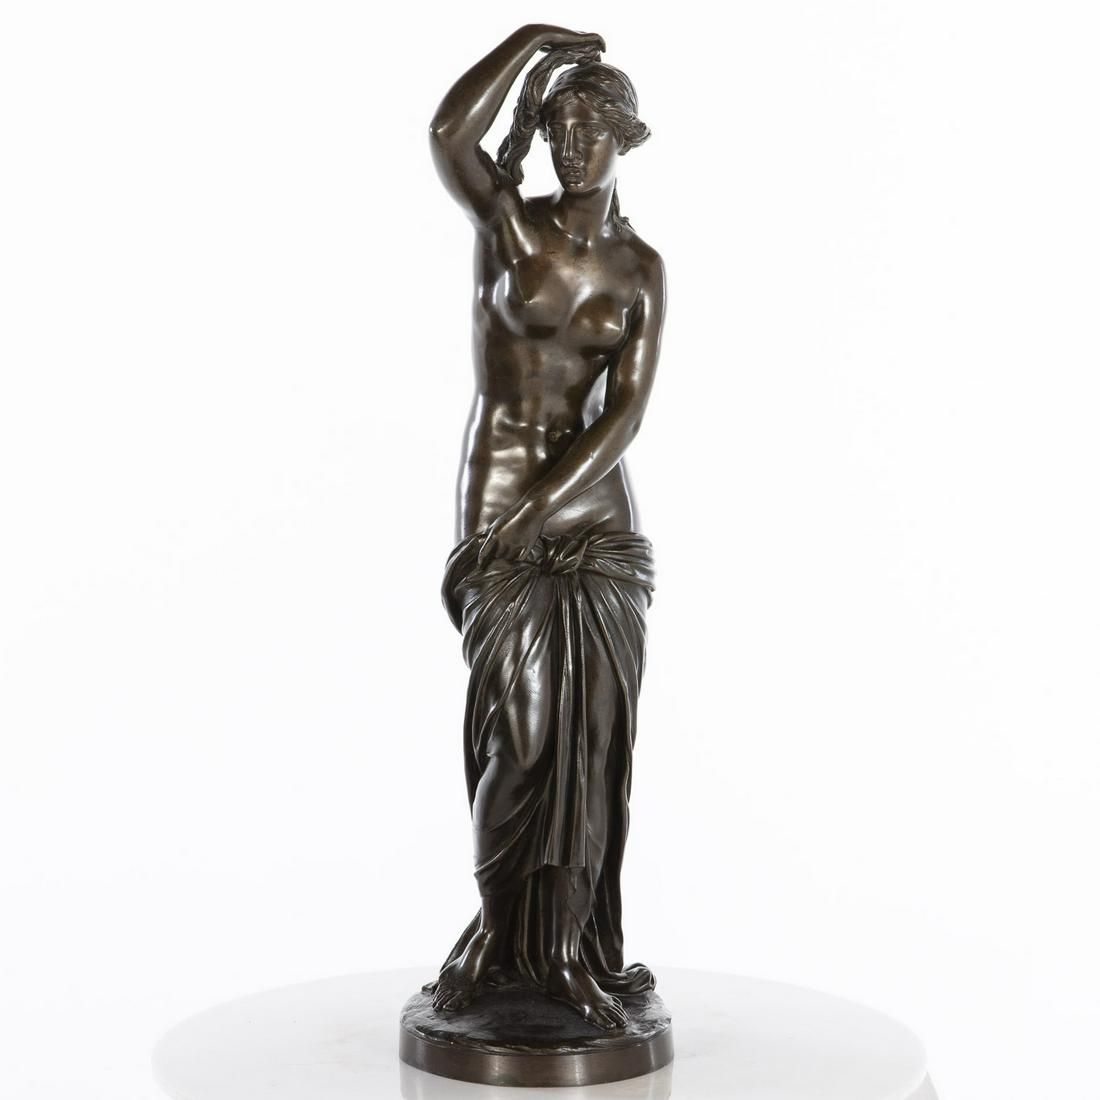 CLASSICAL STYLE BRONZE OF A NUDE 3d3209